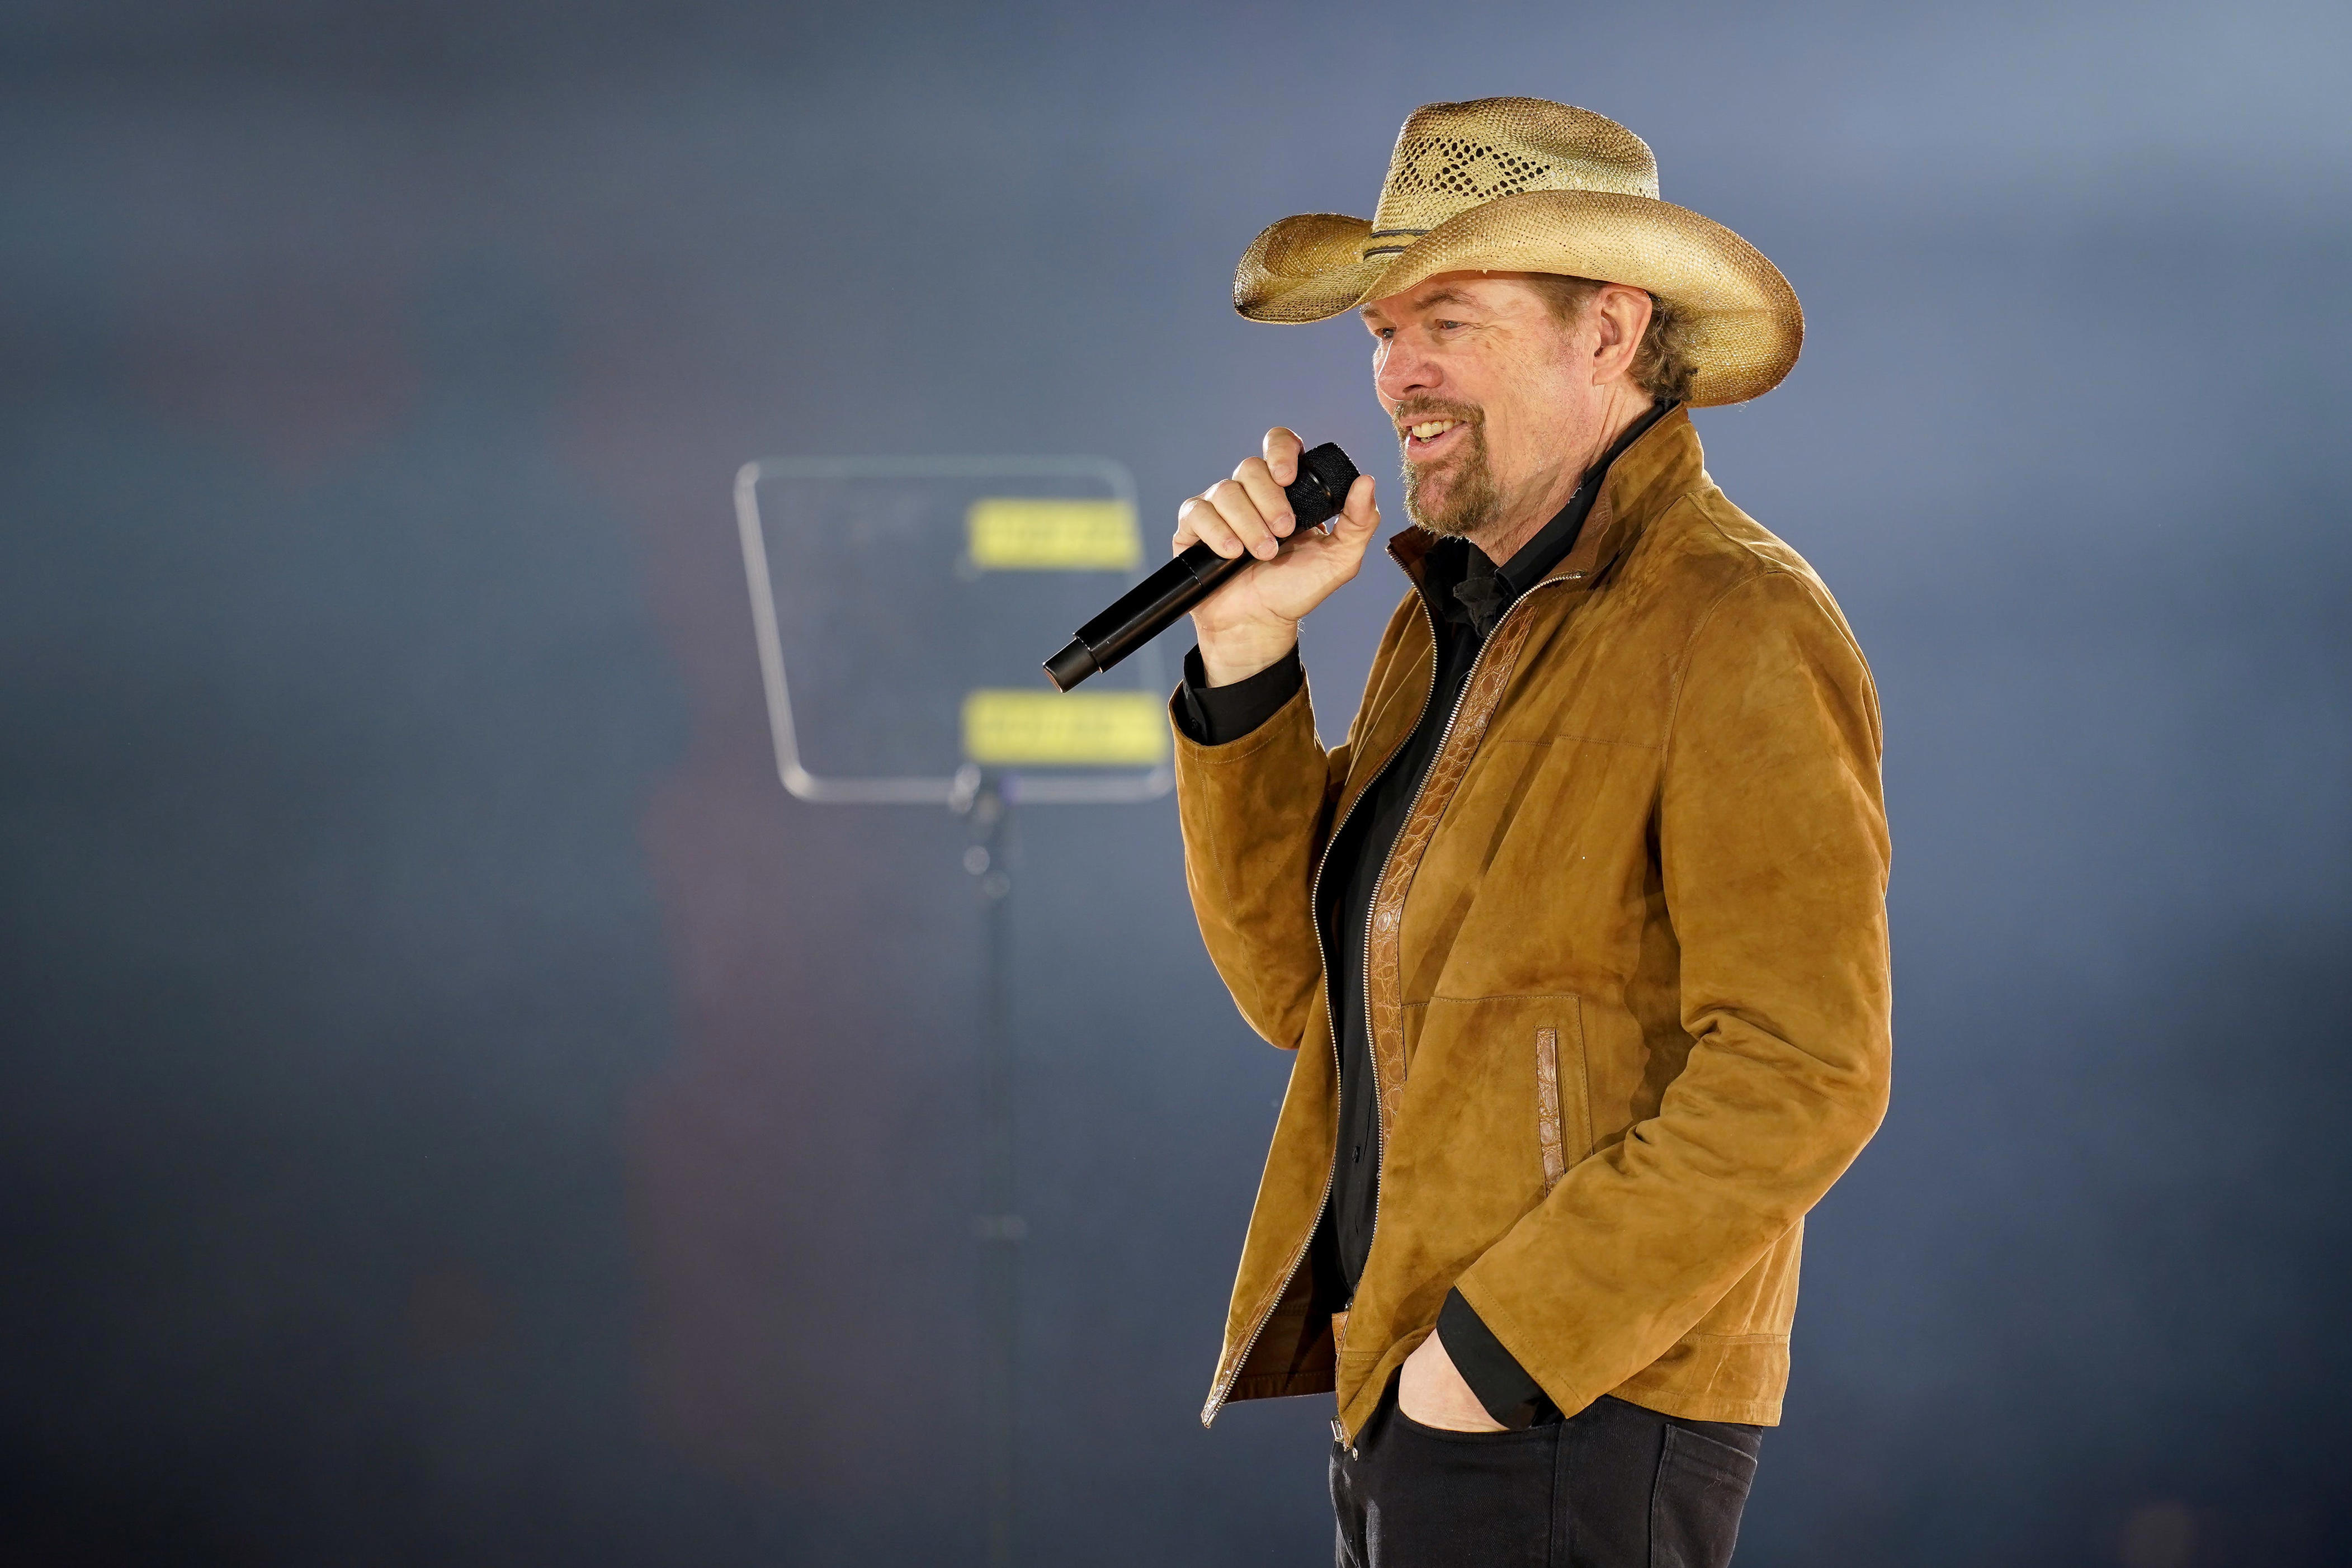 Toby Keith, in one of his final interviews, remained optimistic amid